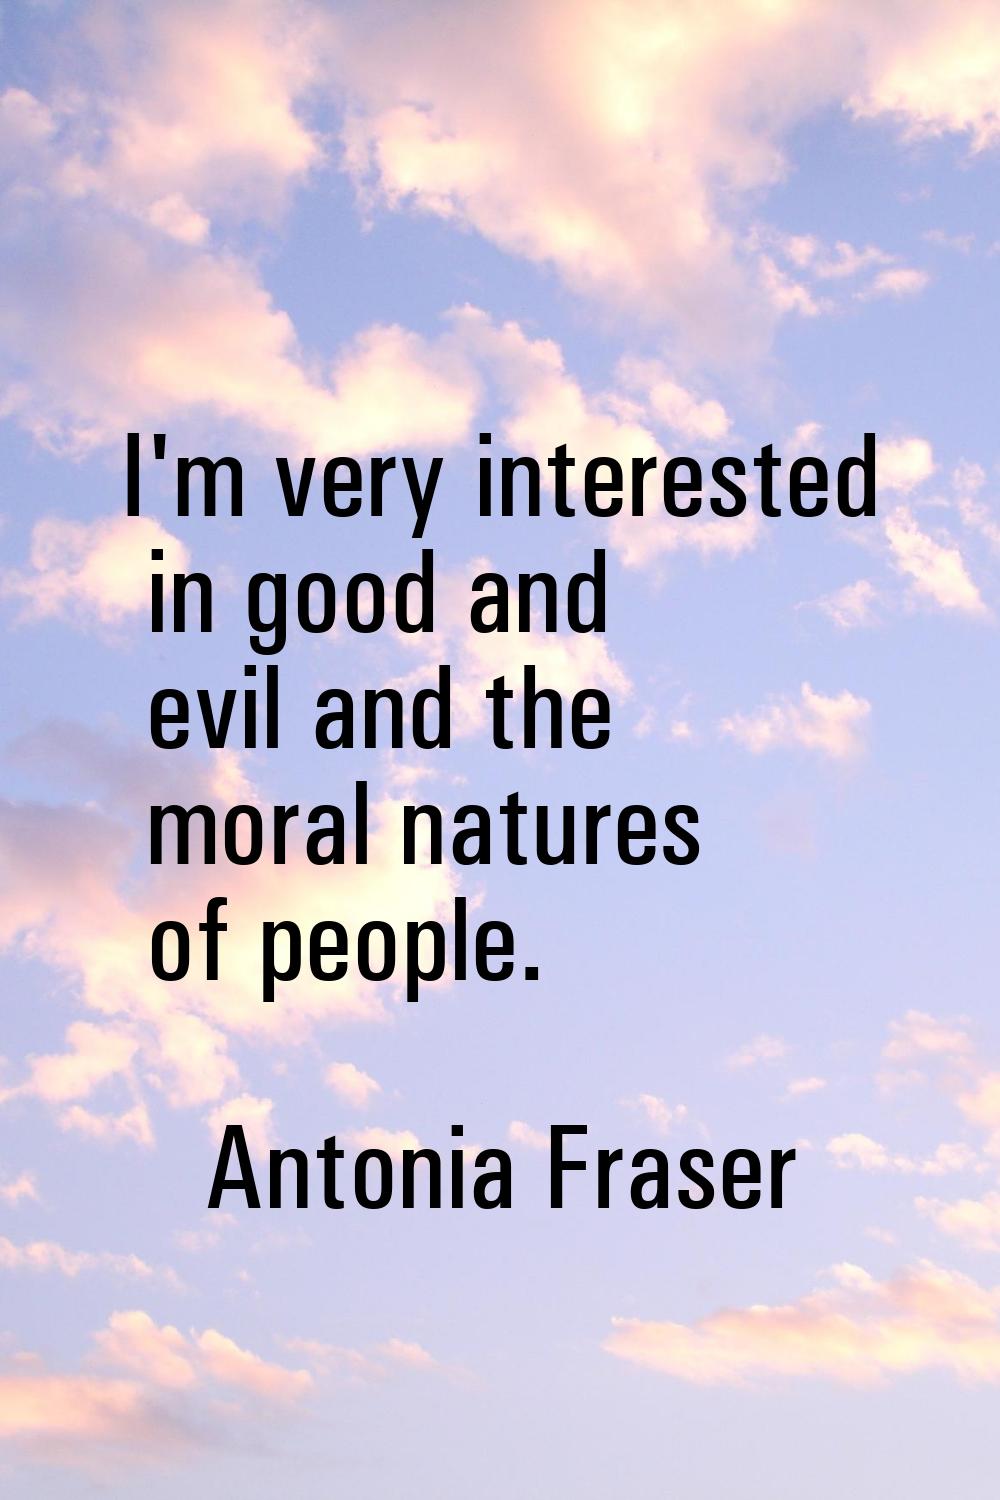 I'm very interested in good and evil and the moral natures of people.